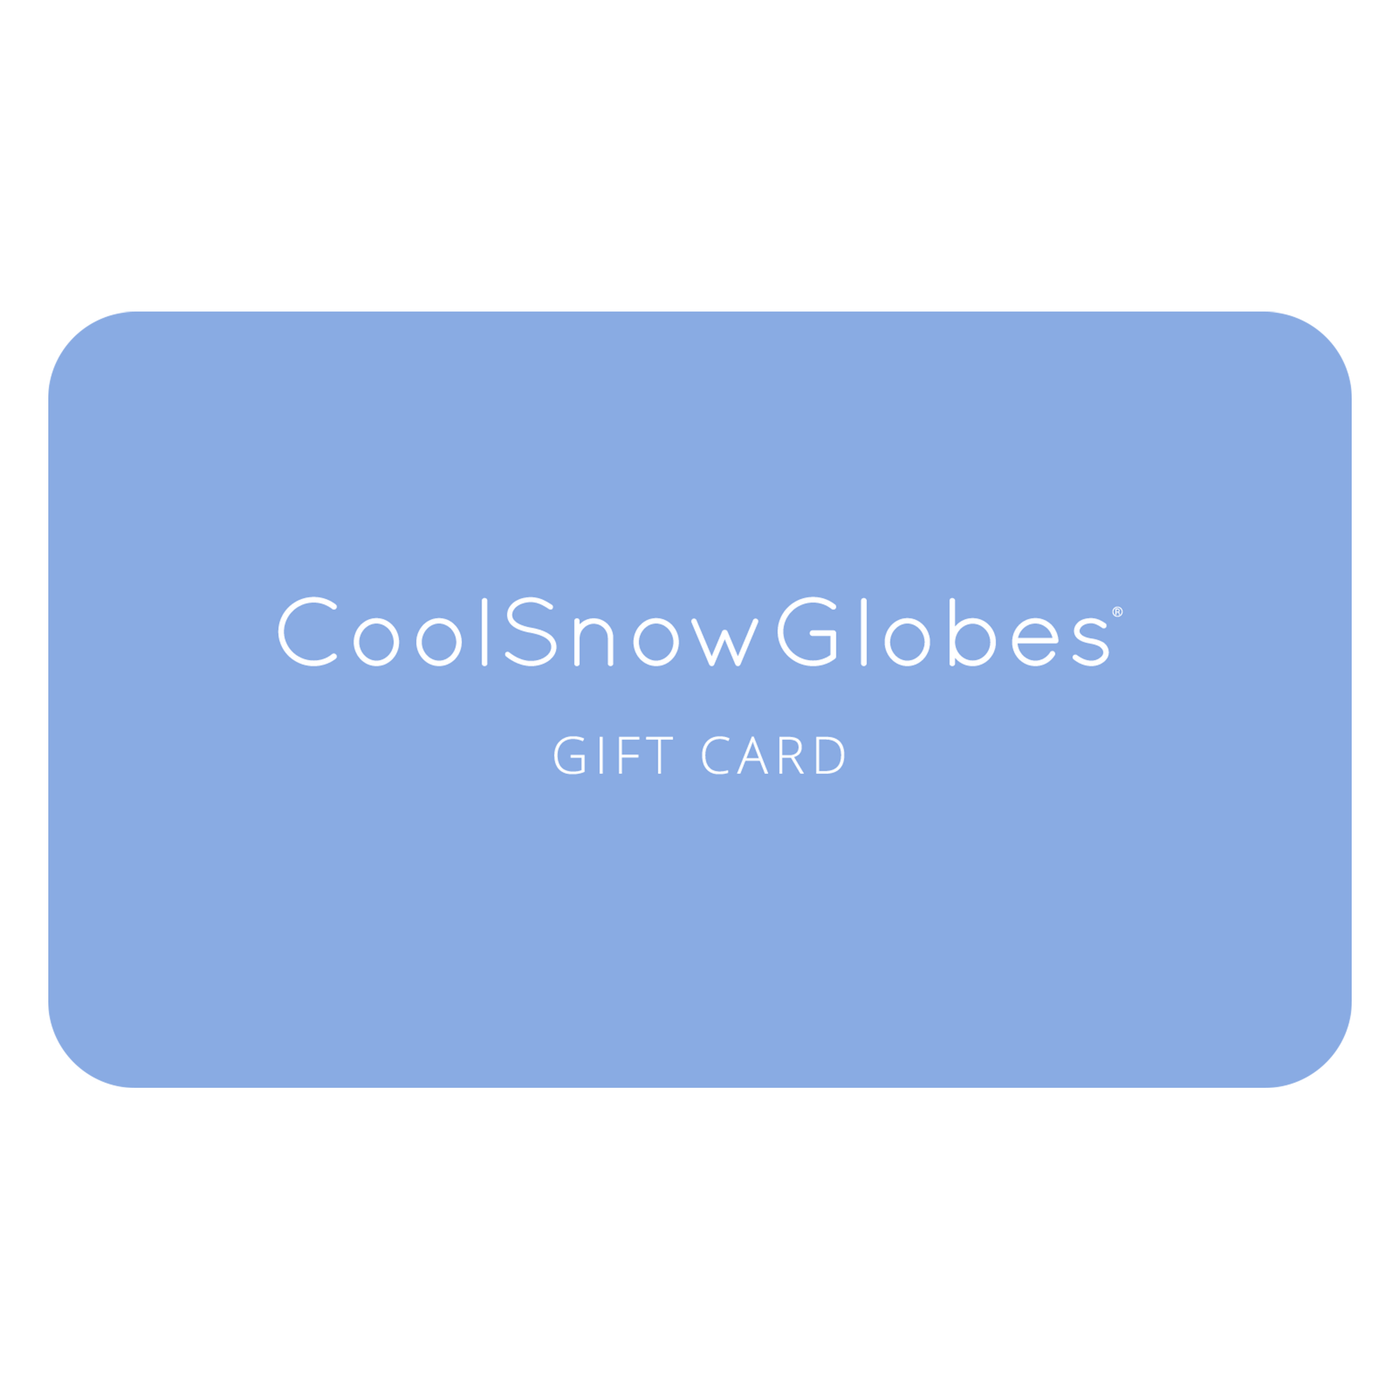 CoolSnowGlobes CoolSnowGlobes Gift Card